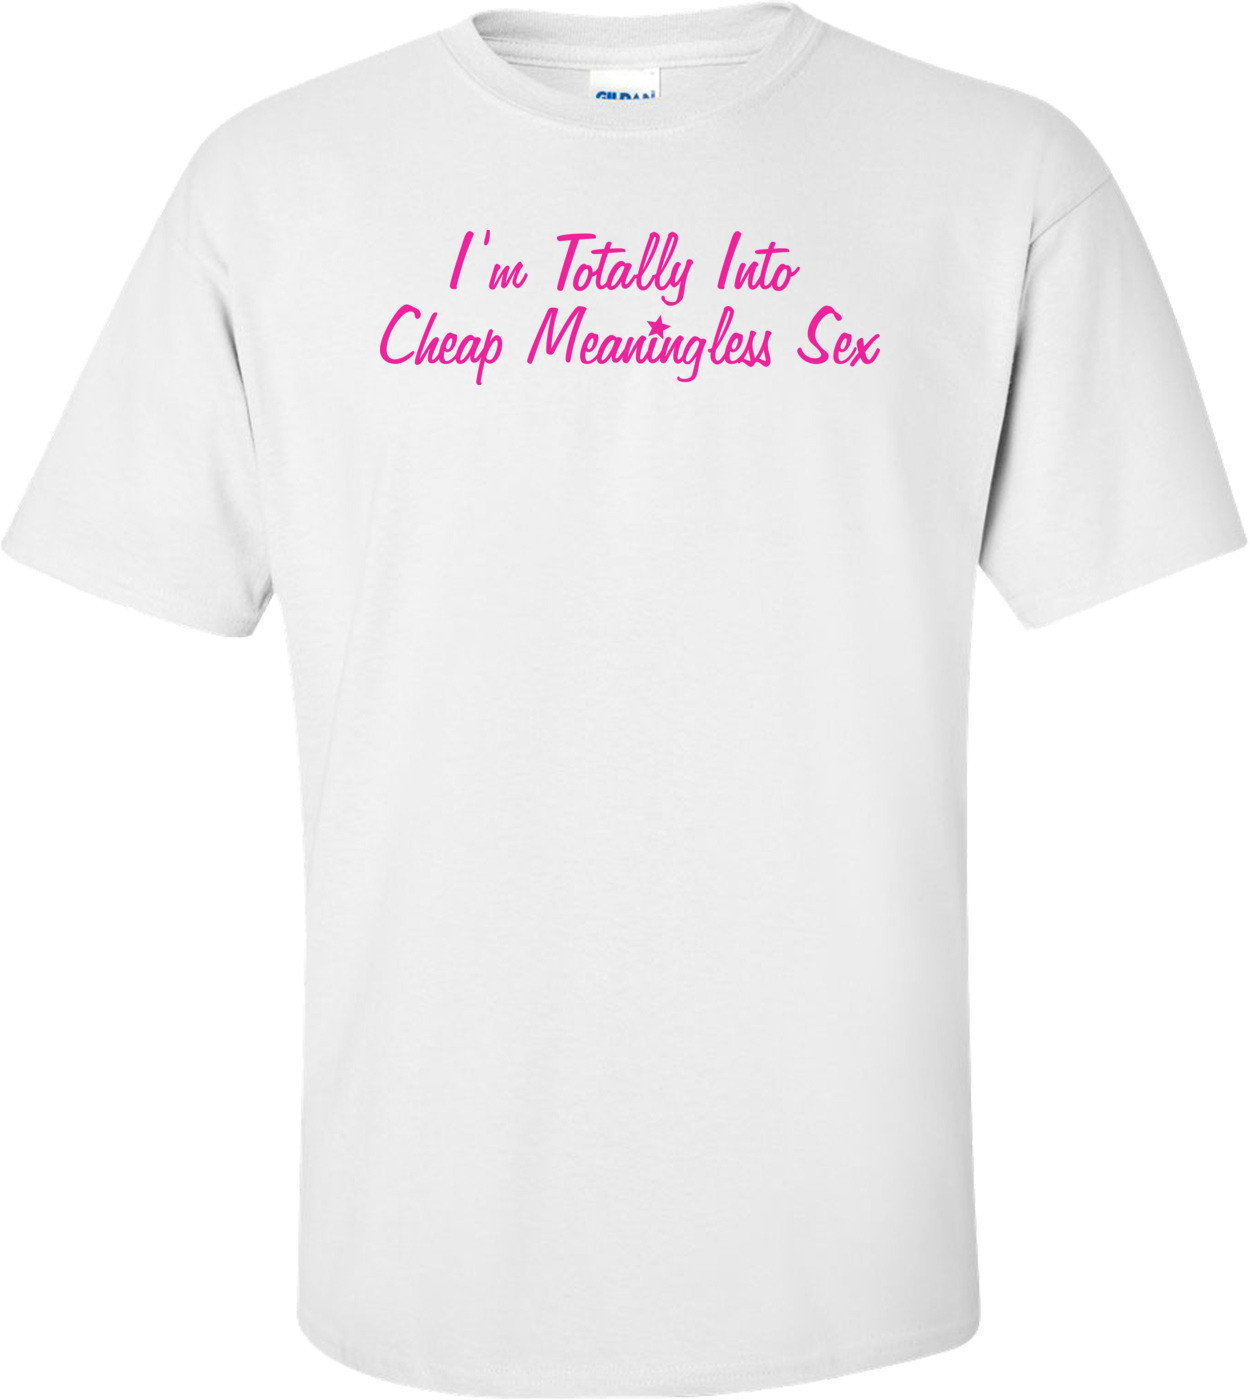 I'm Totally Into Cheap Meaningless Sex T-shirt